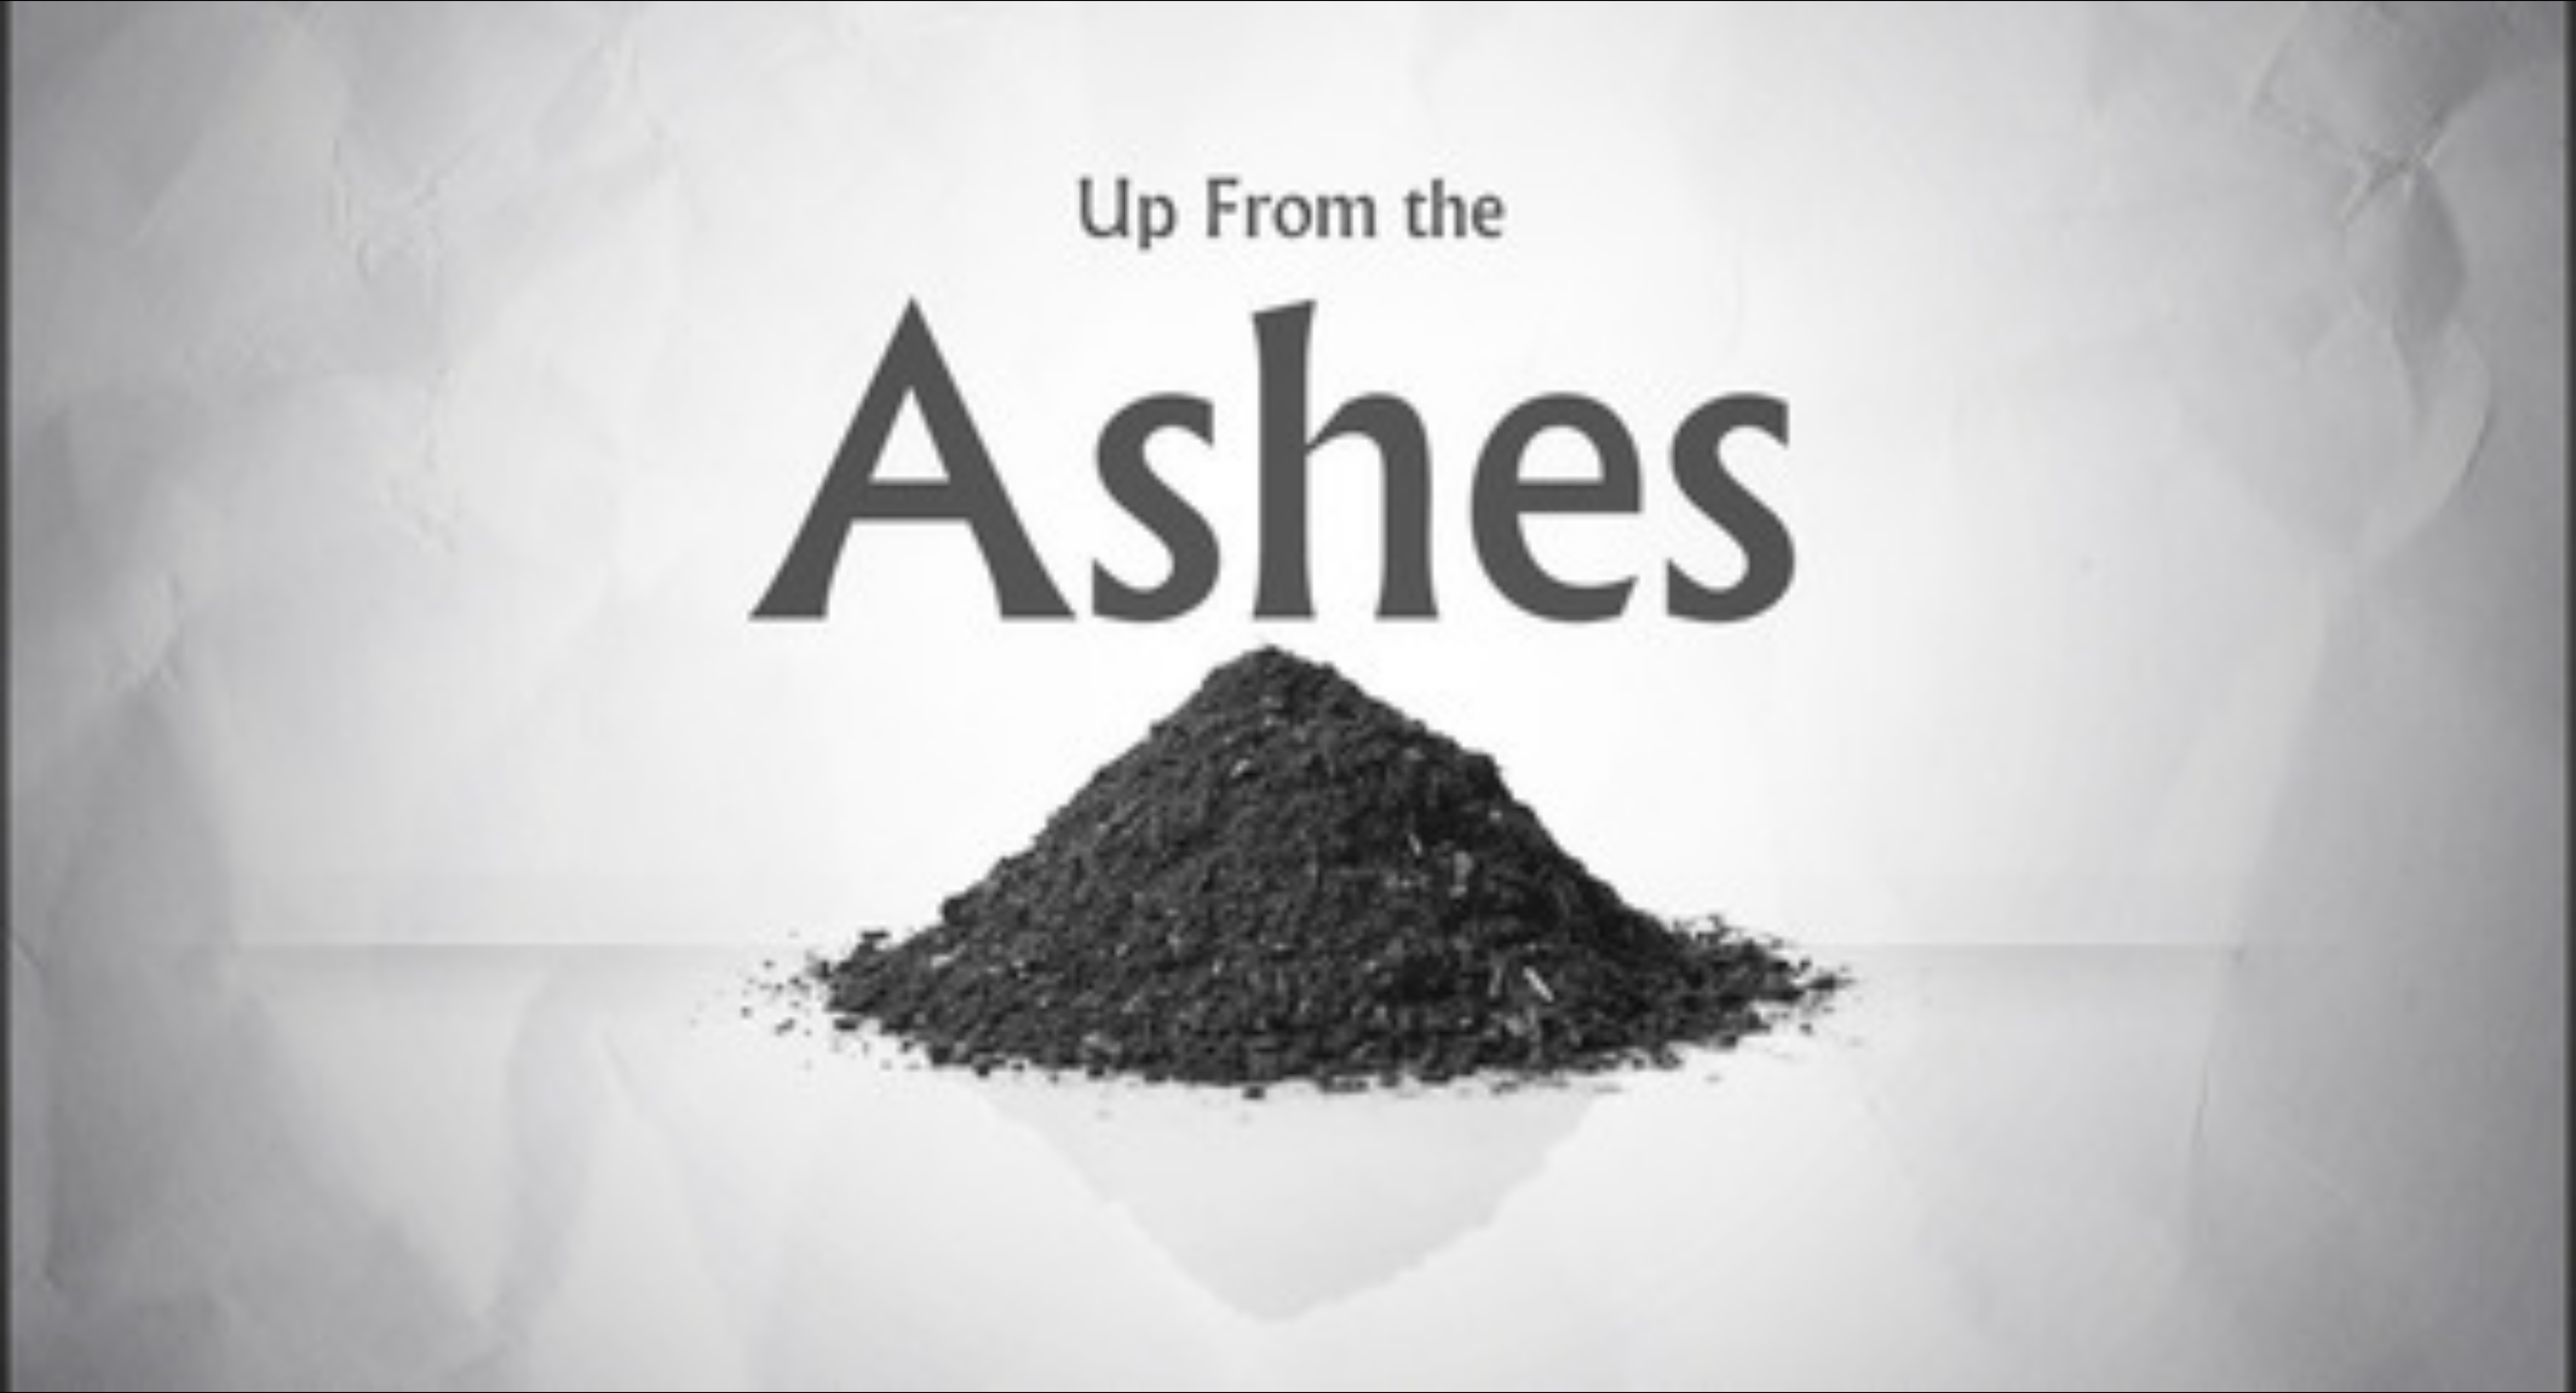 Up From the Ashes